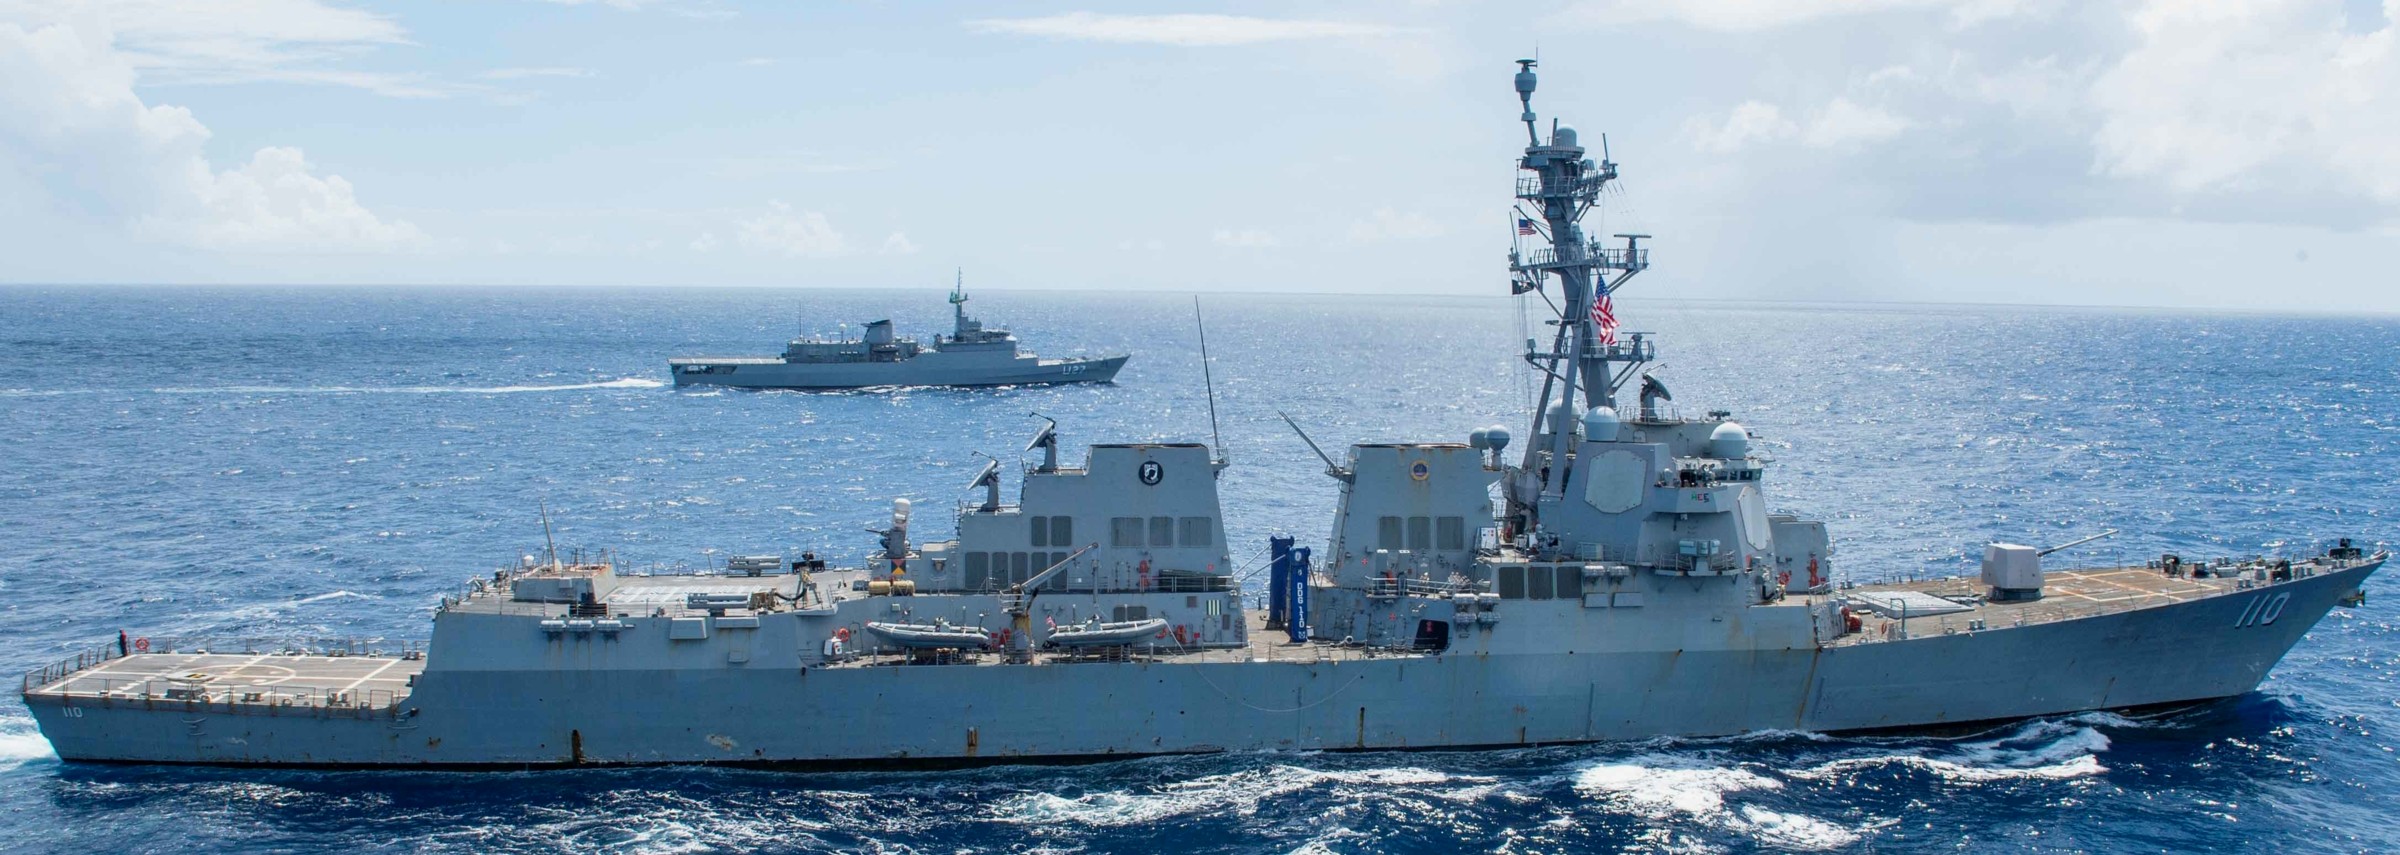 ddg-110 uss william p. lawrence arleigh burke class guided missile destroyer aegis us navy caribbean sea 70